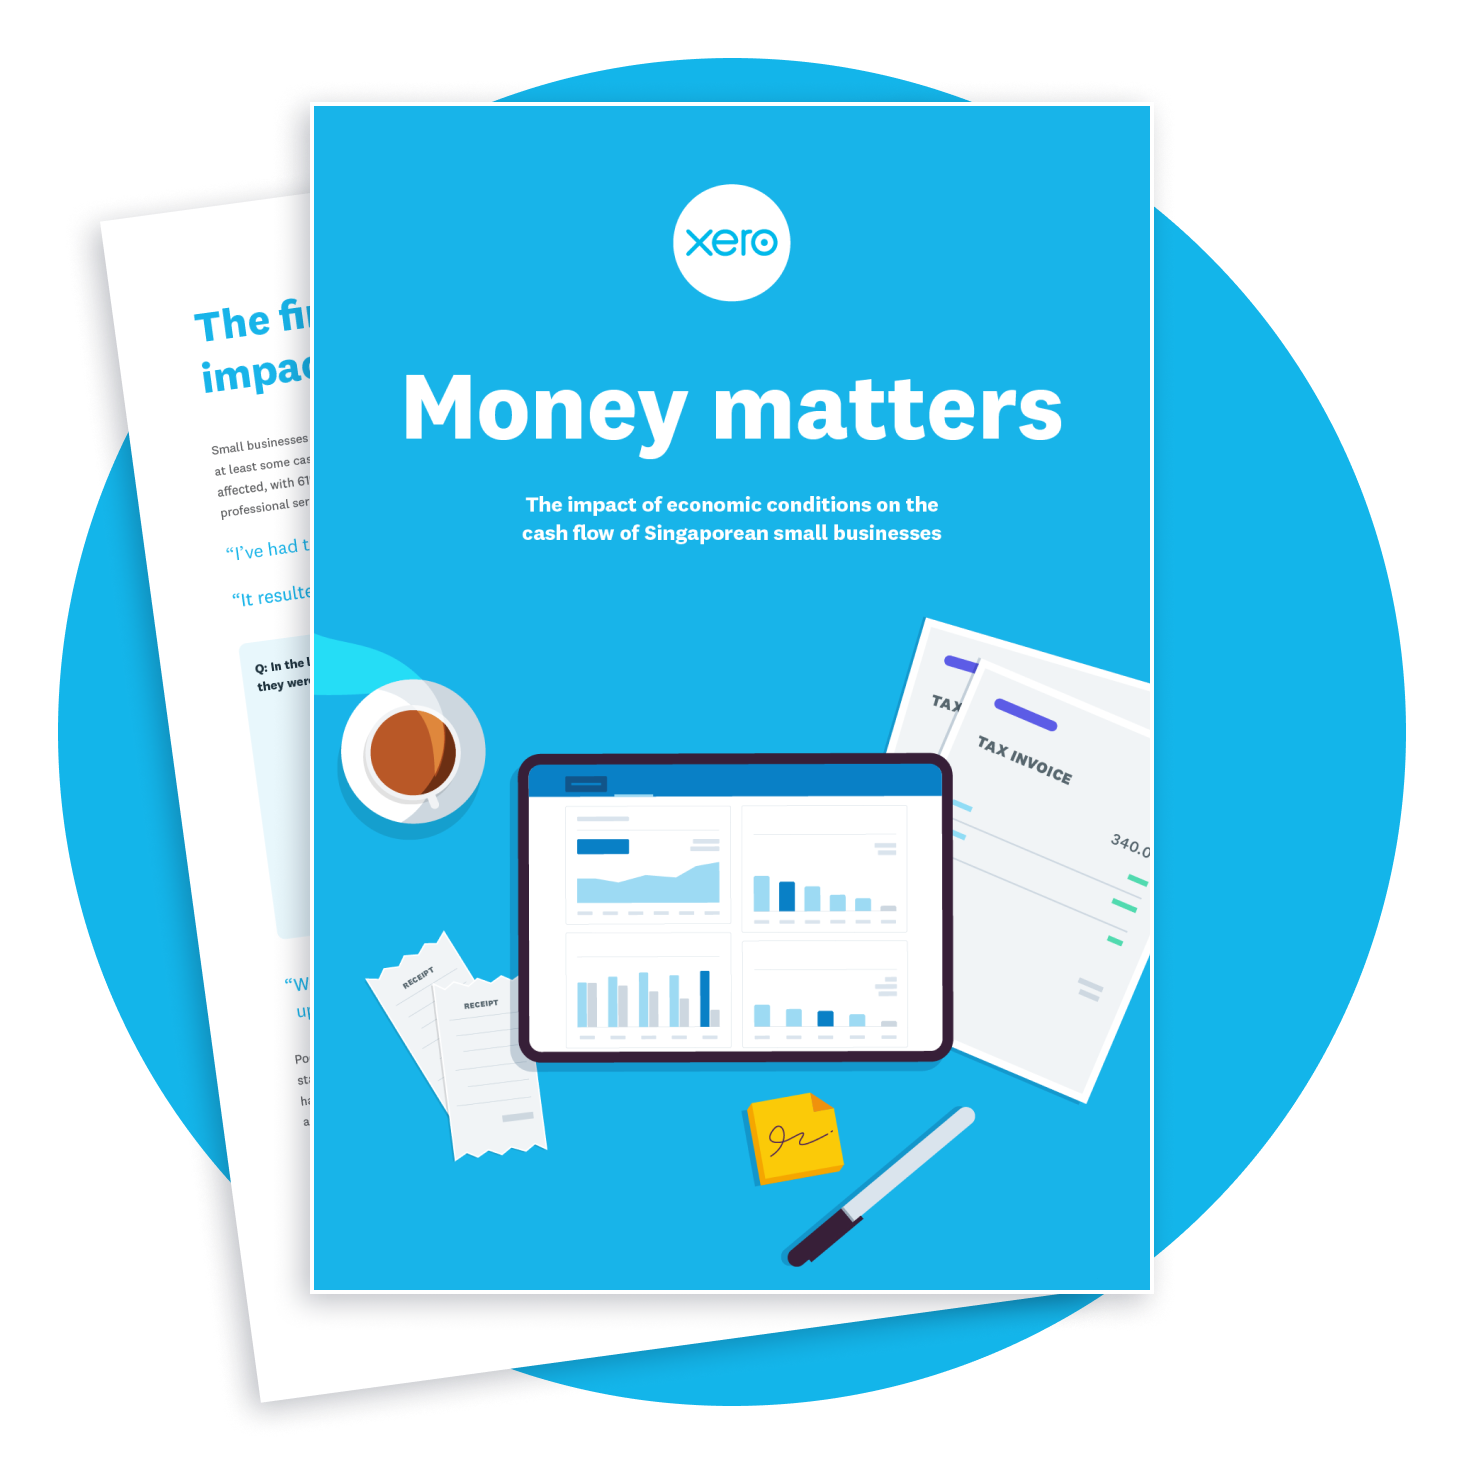 An image of the Money matters report